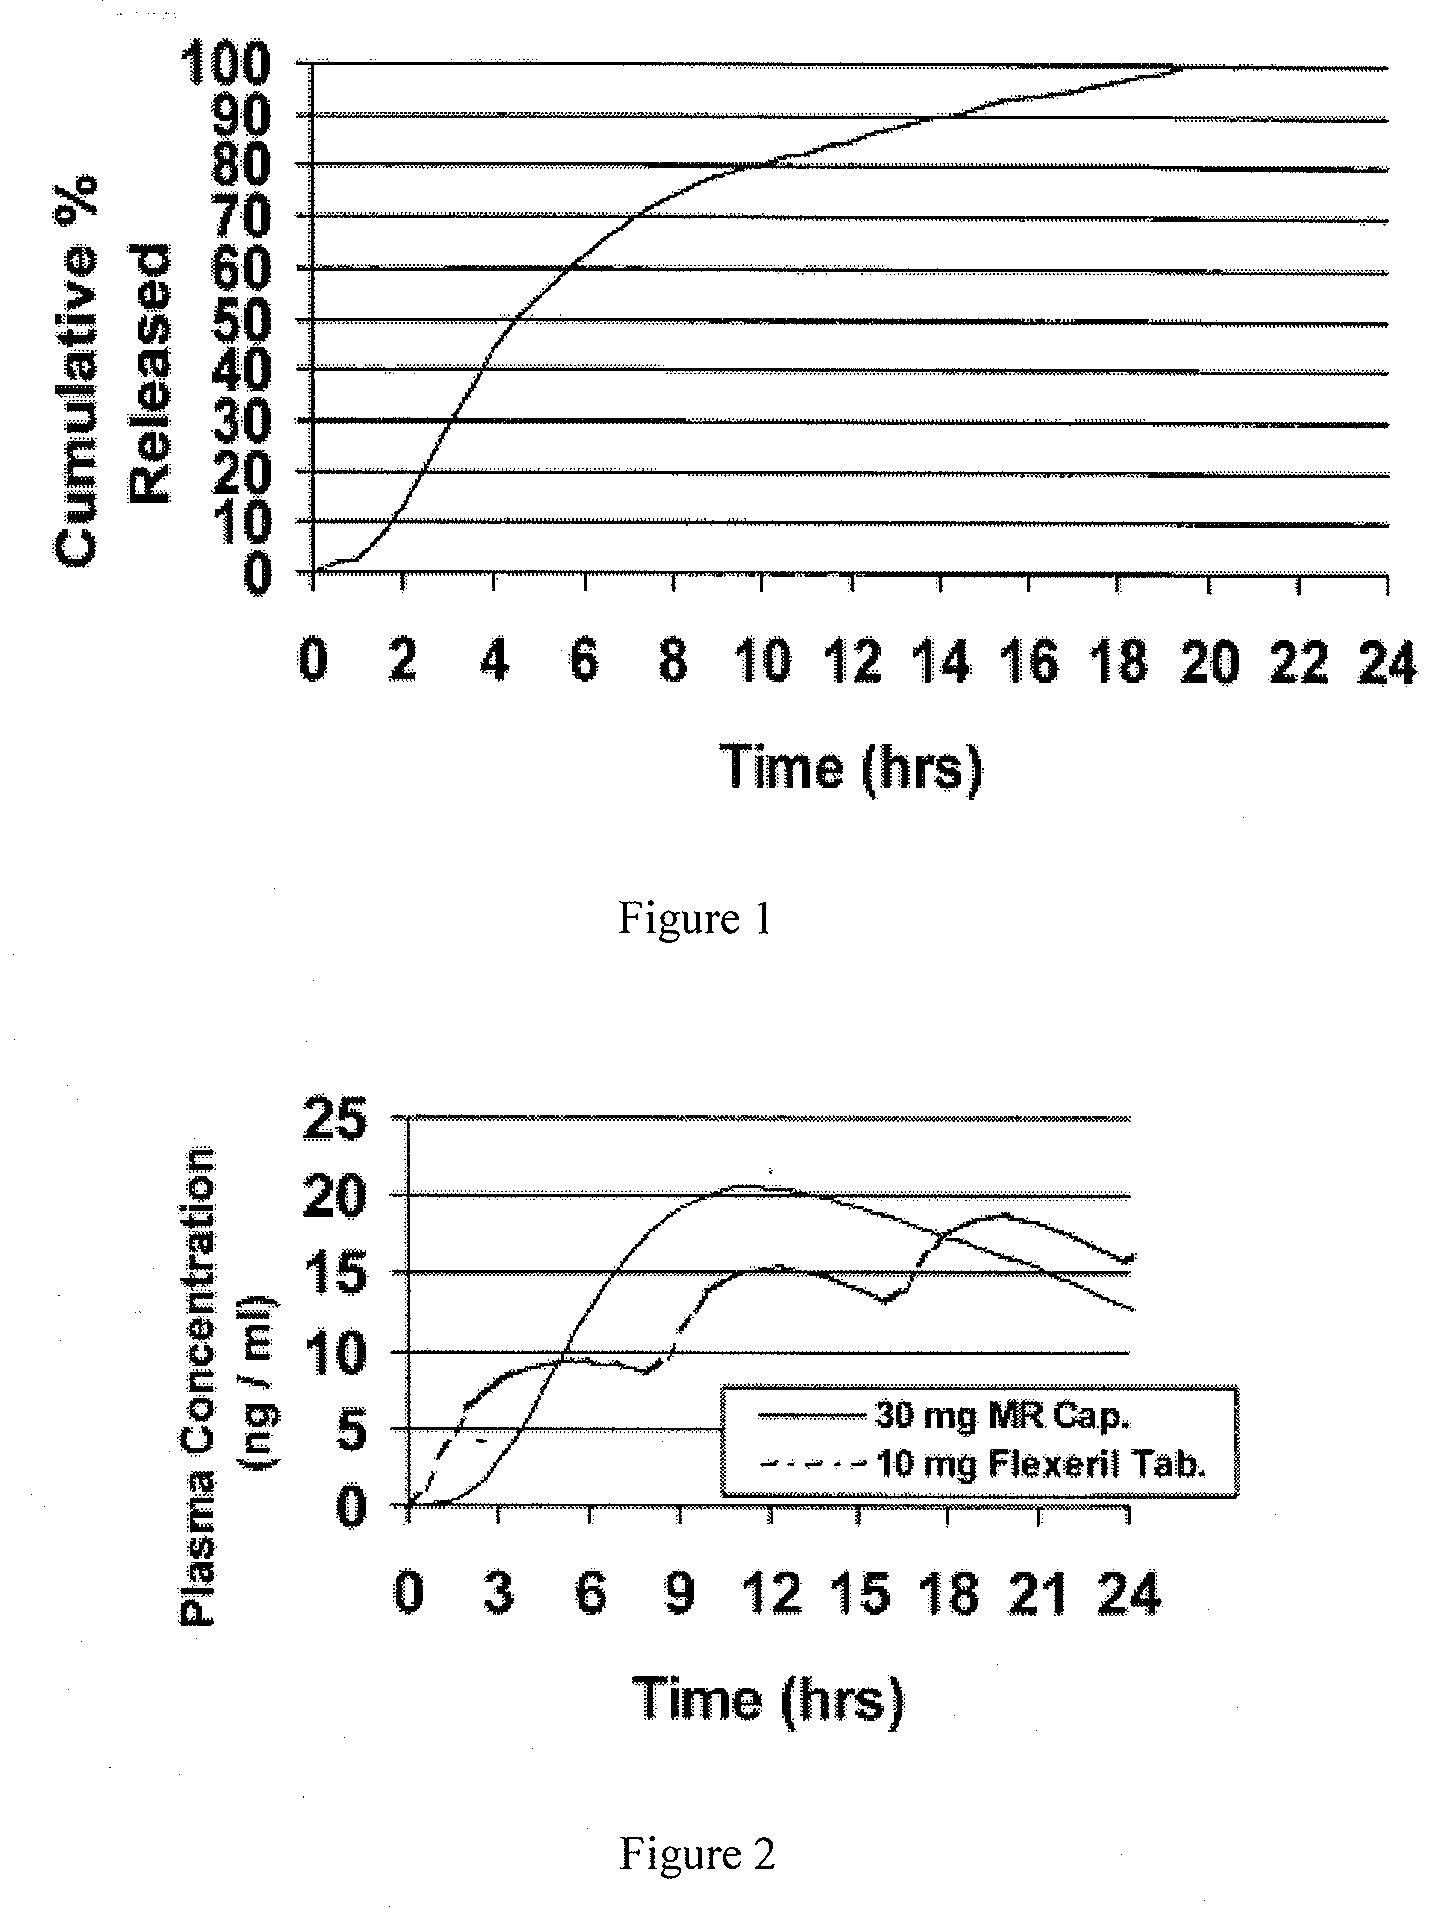 Preparation of controlled release skeletal muscle relaxant dosage forms